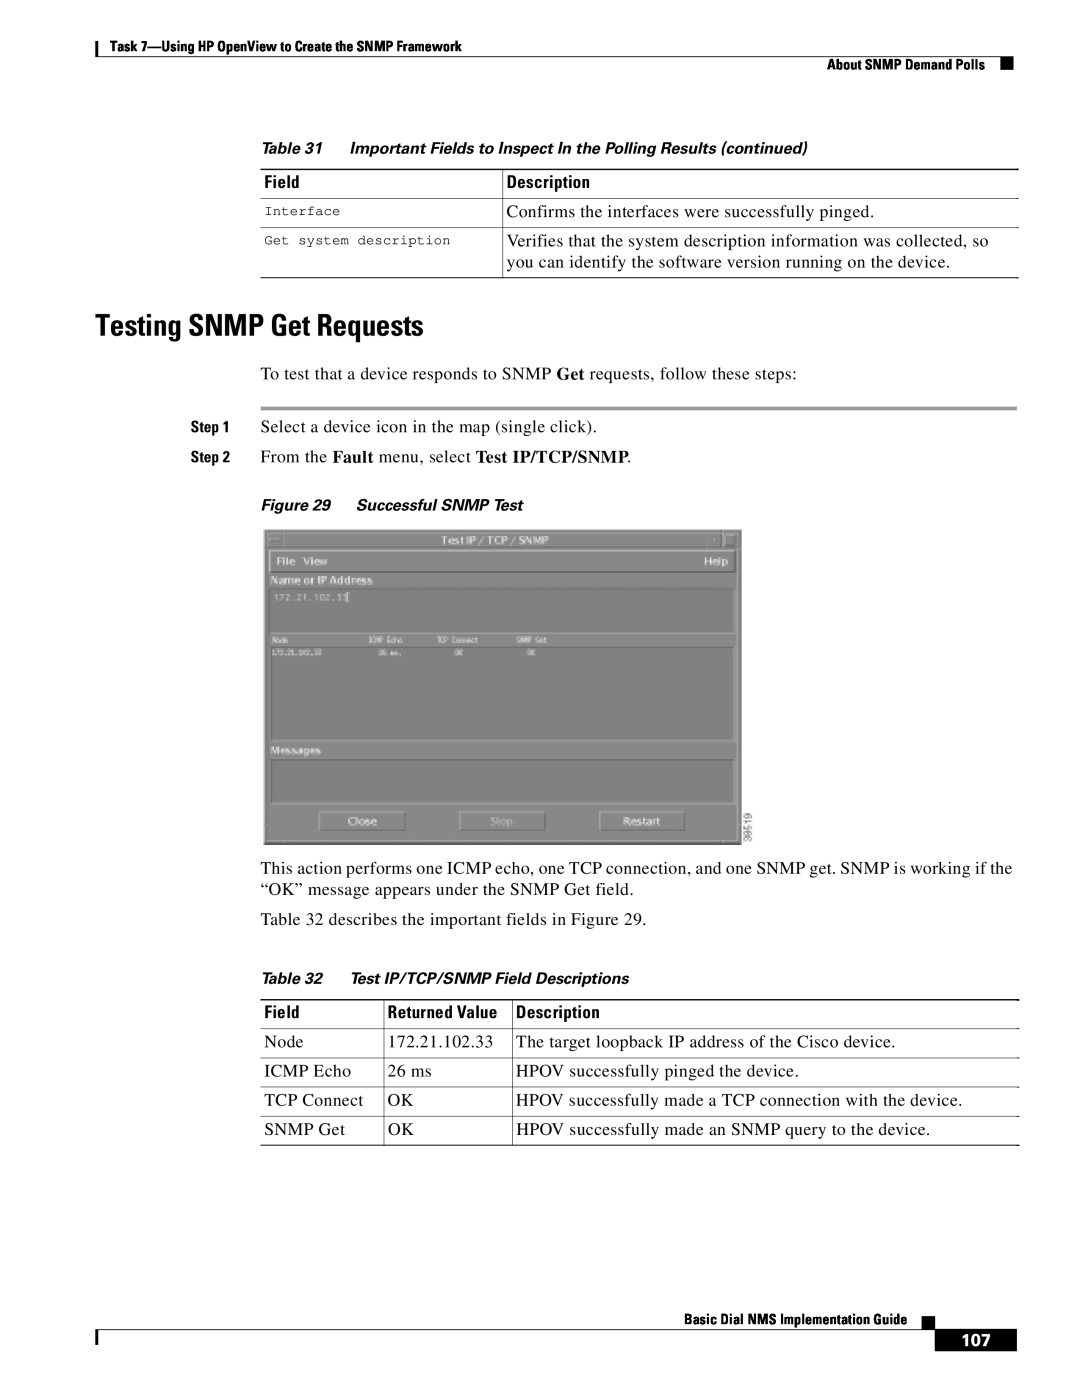 Cisco Systems Dial NMS manual Testing SNMP Get Requests, Important Fields to Inspect In the Polling Results continued 